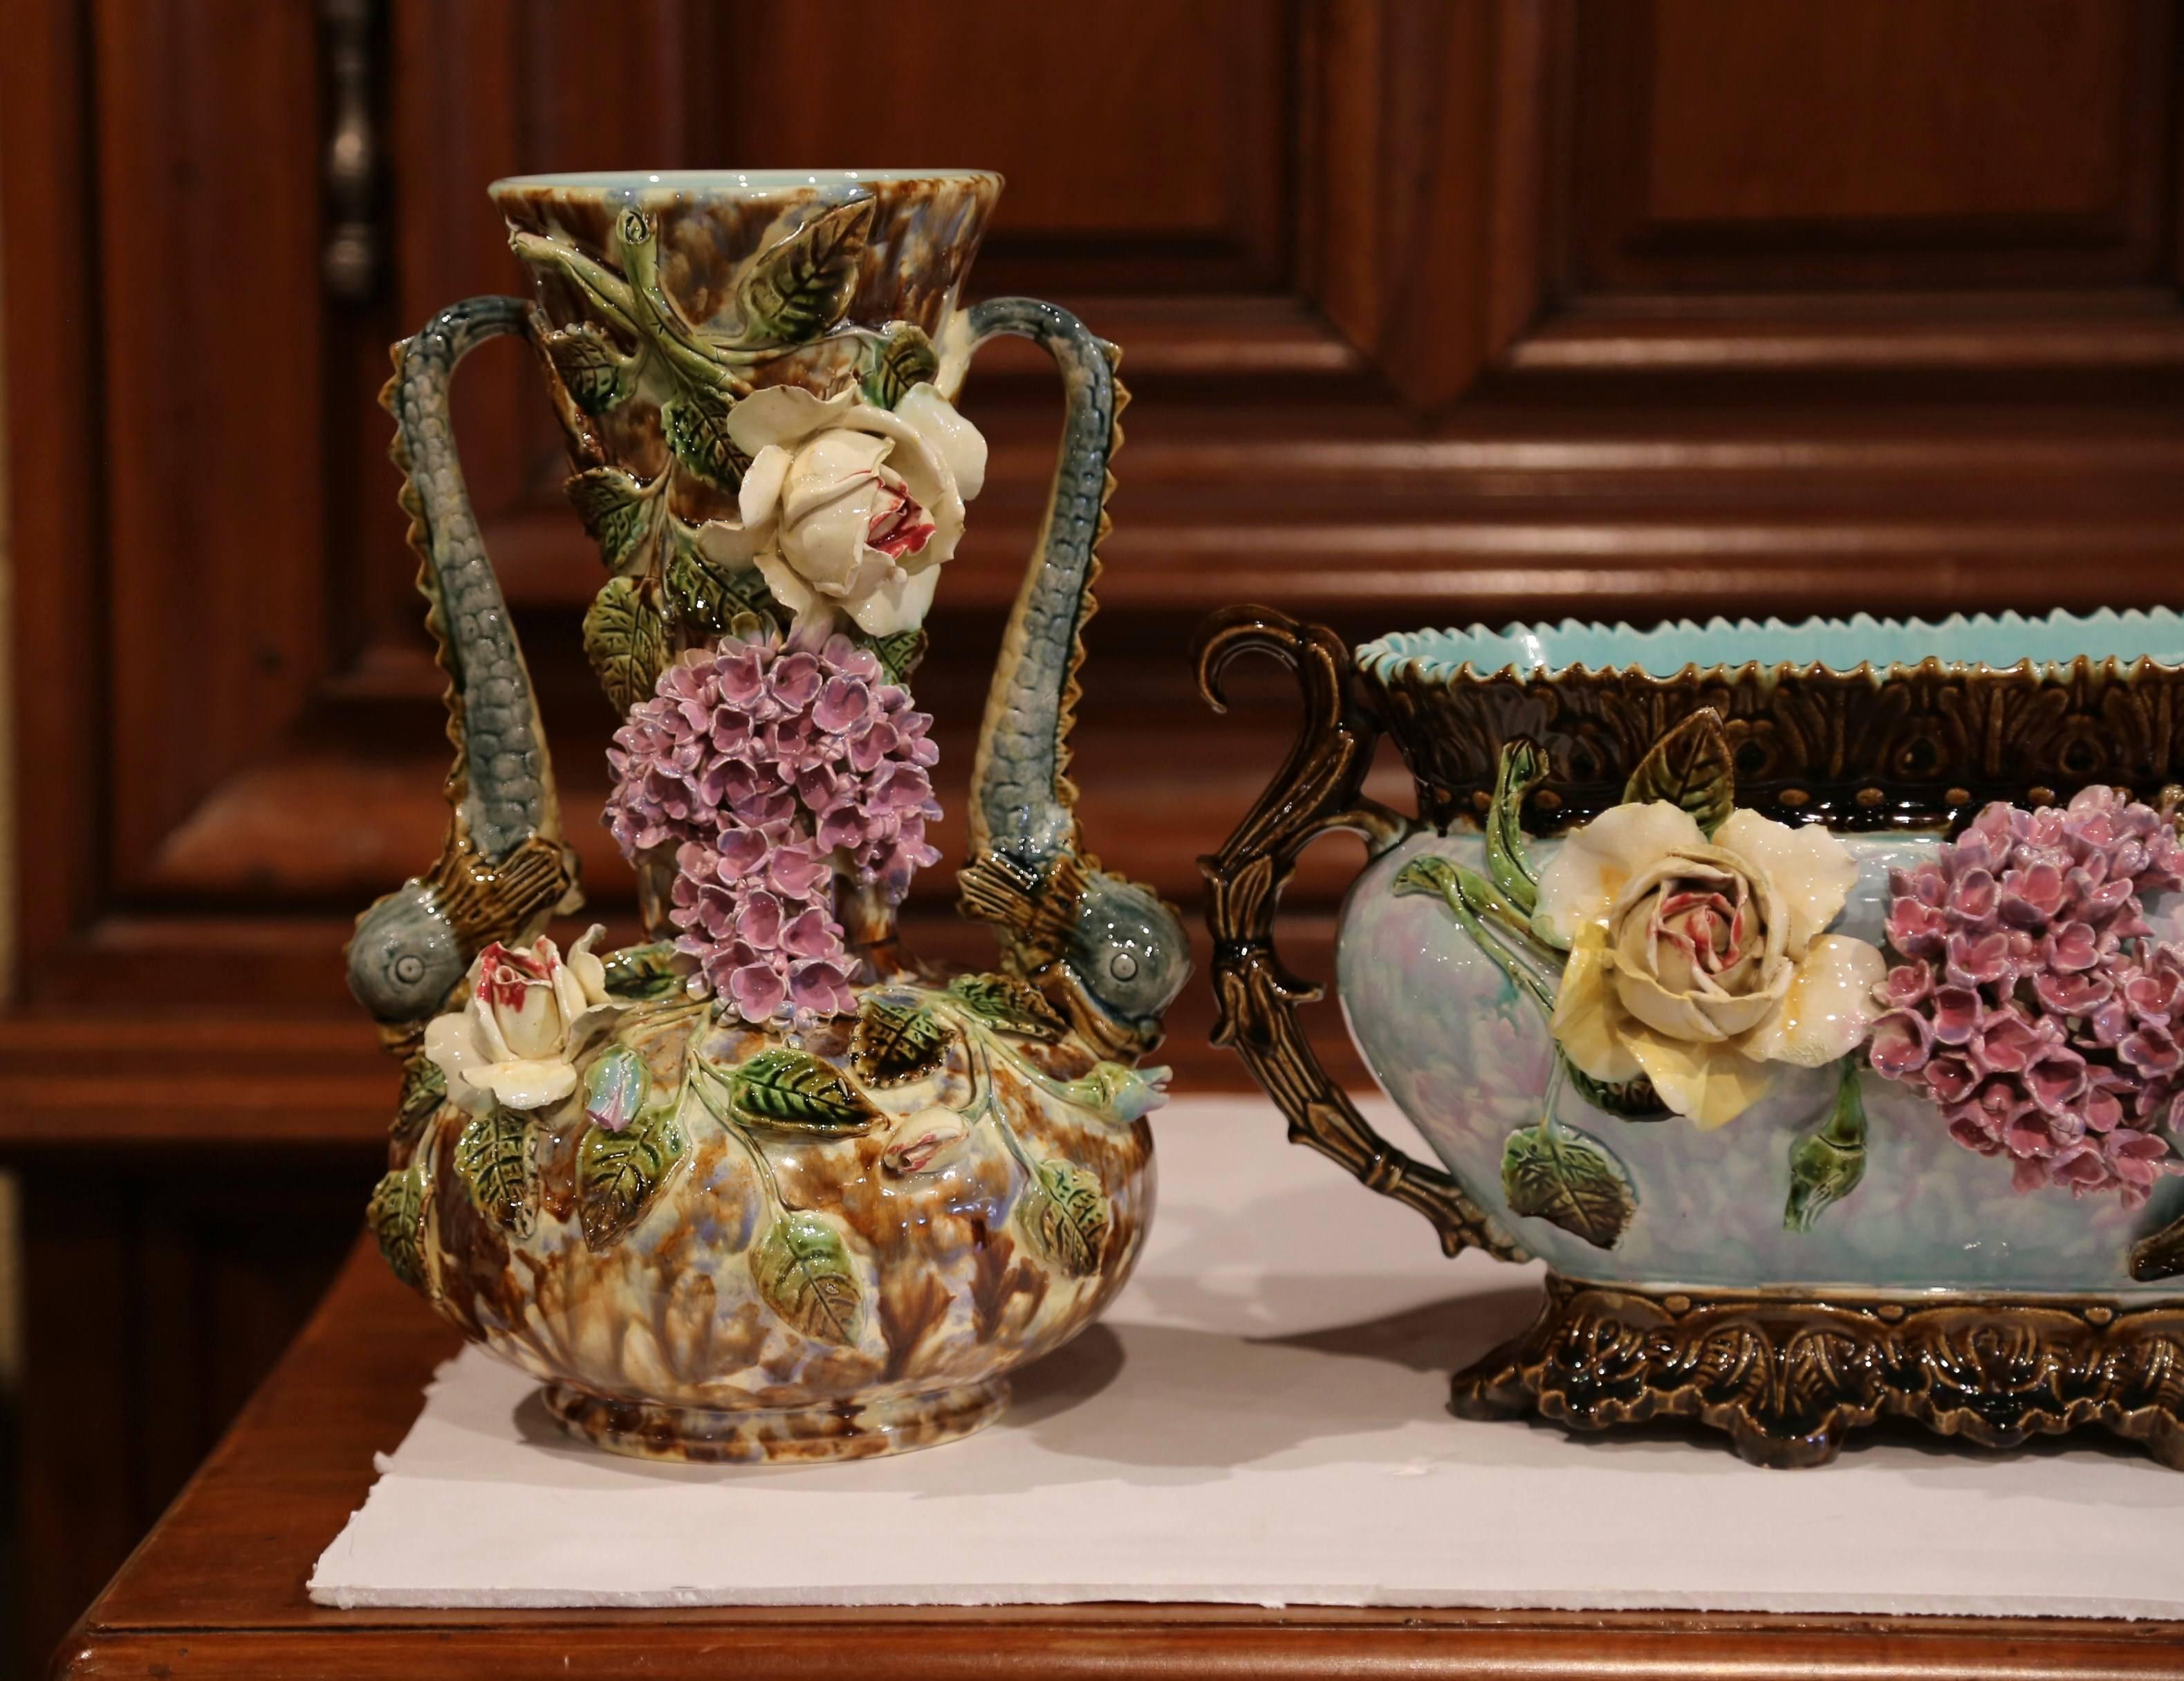 Beautifully sculpted and colorful, this set of antique Majolica vases and matching jardiniere would be a wonderful addition to a mantel, tabletop or bookshelf. Crafted in France, circa 1870, each hand-painted piece is covered with ornate floral